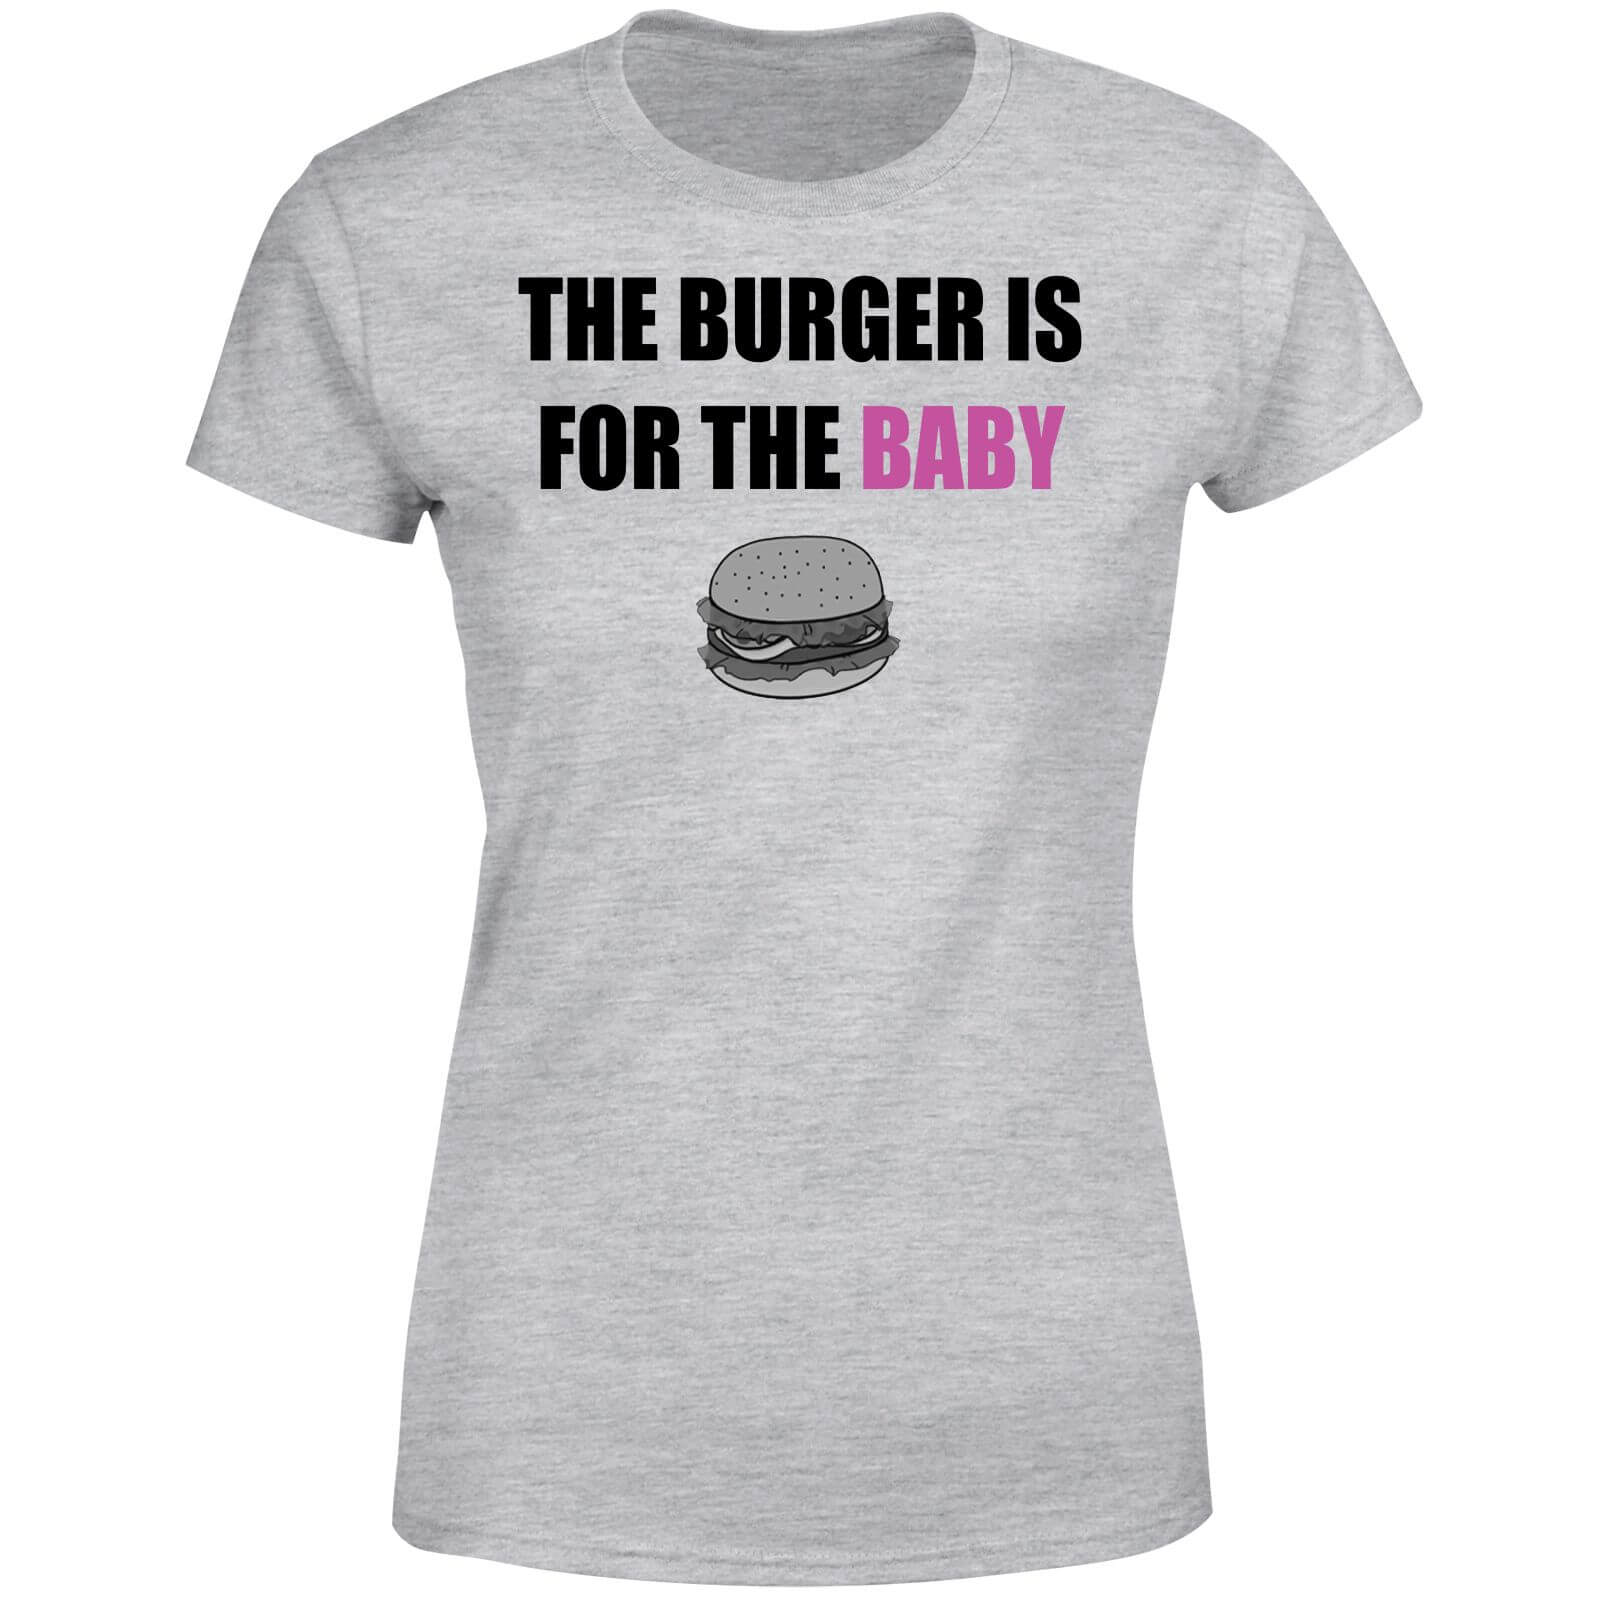 Be My Pretty Burger for The Baby Women's T-Shirt - Grey - 3XL - Grey